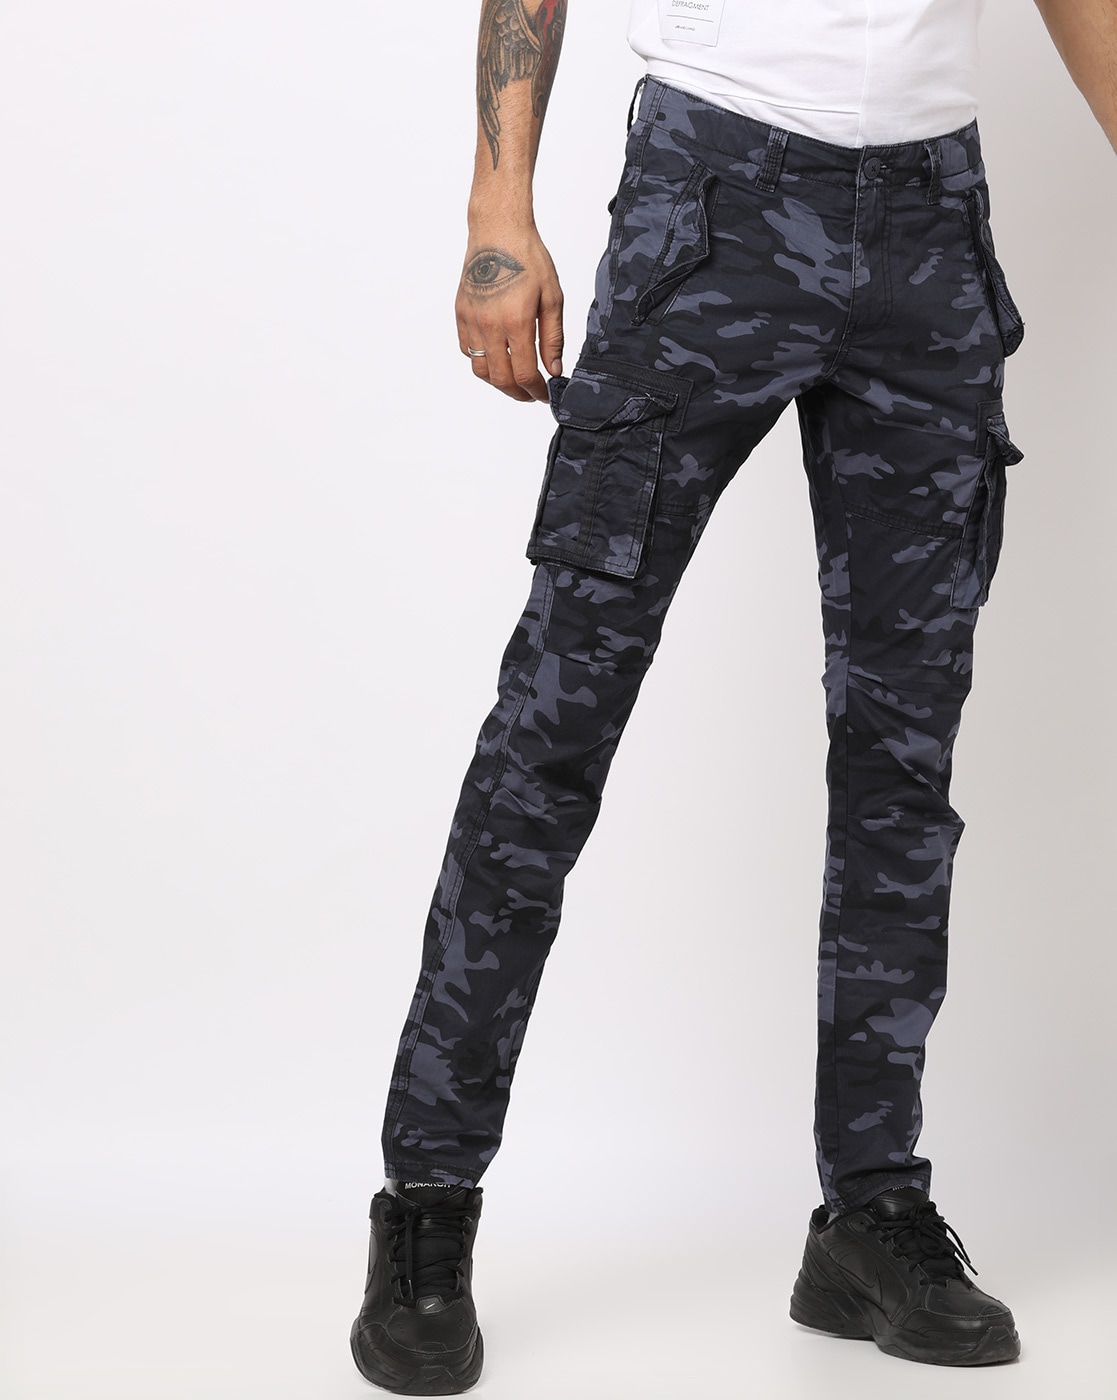 Grey Camo Print Cargo Trousers  Janes Stall